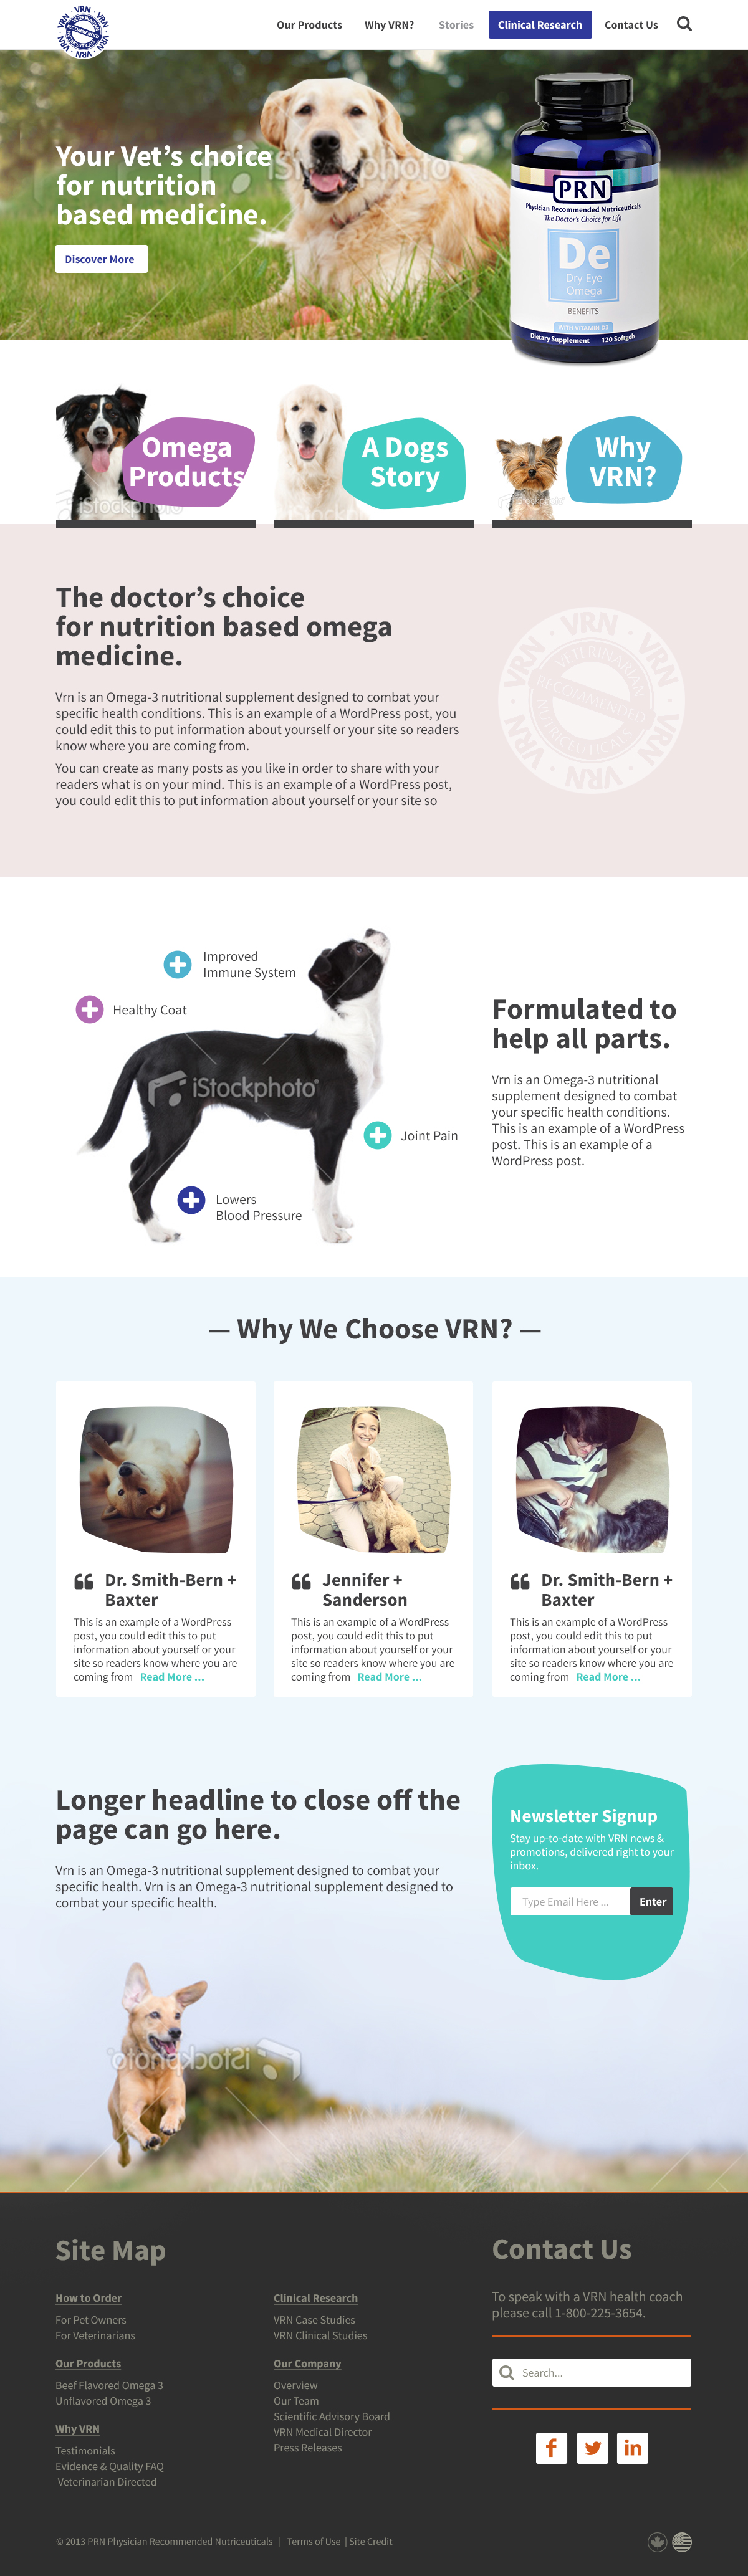 dog product company home page design long form